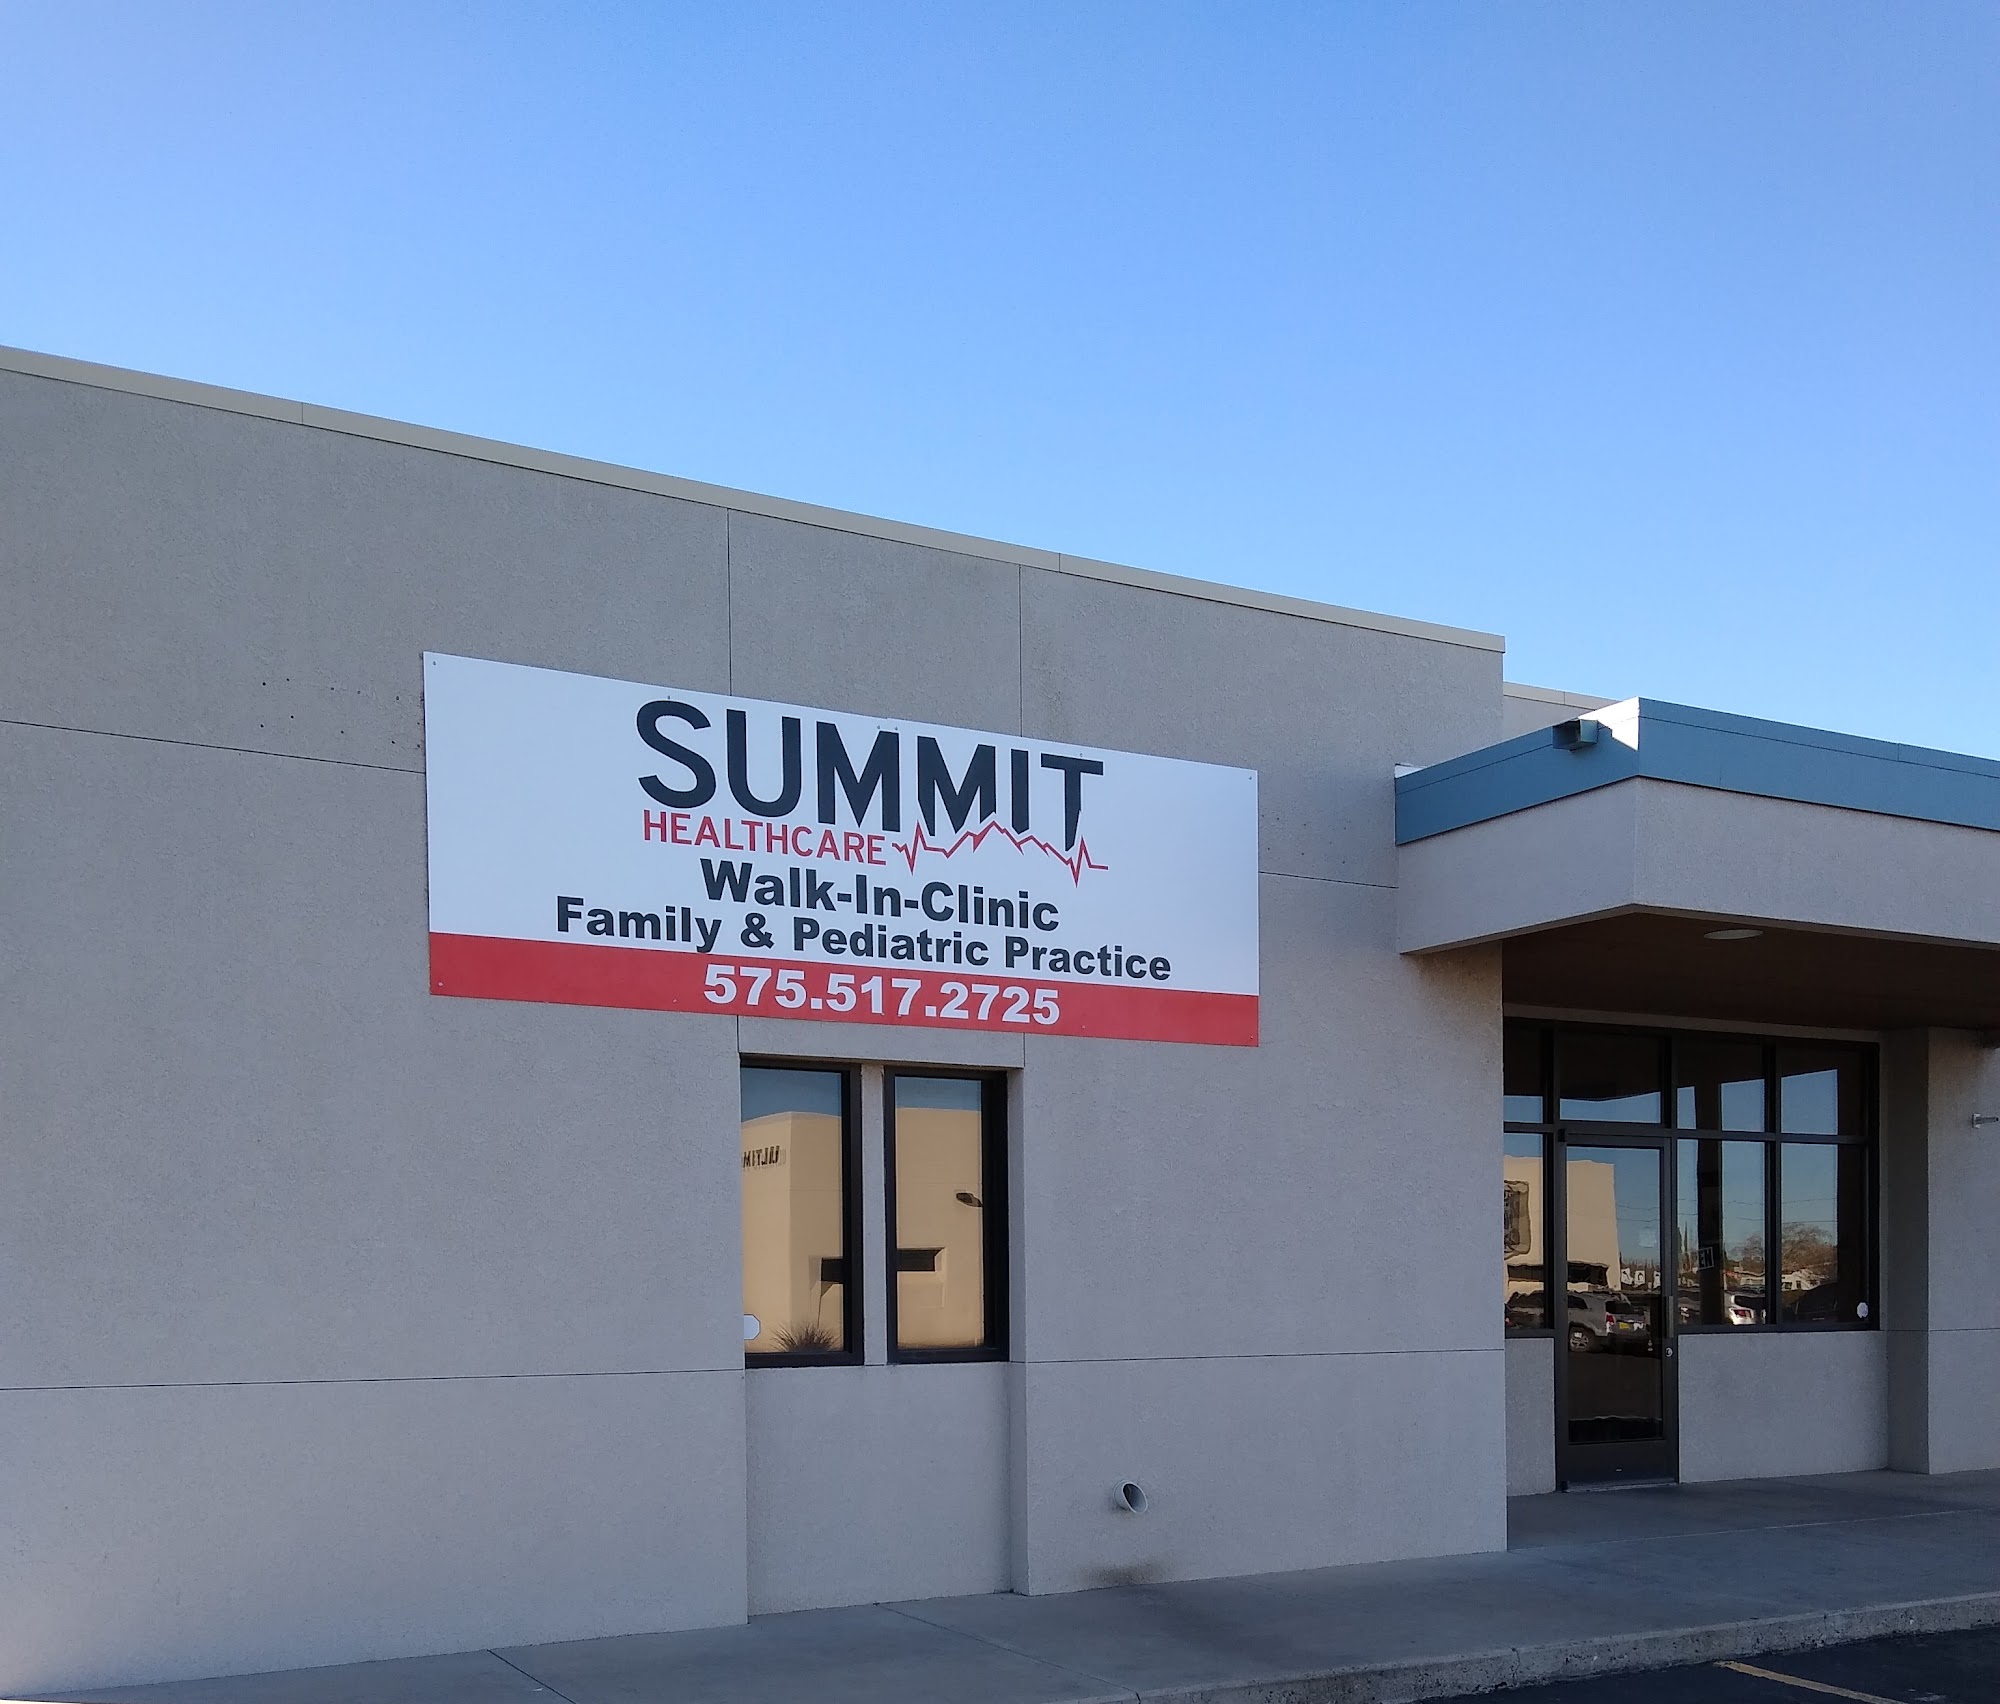 Summit Healthcare, Deming, NM 111 N Pearl St, Deming New Mexico 88030